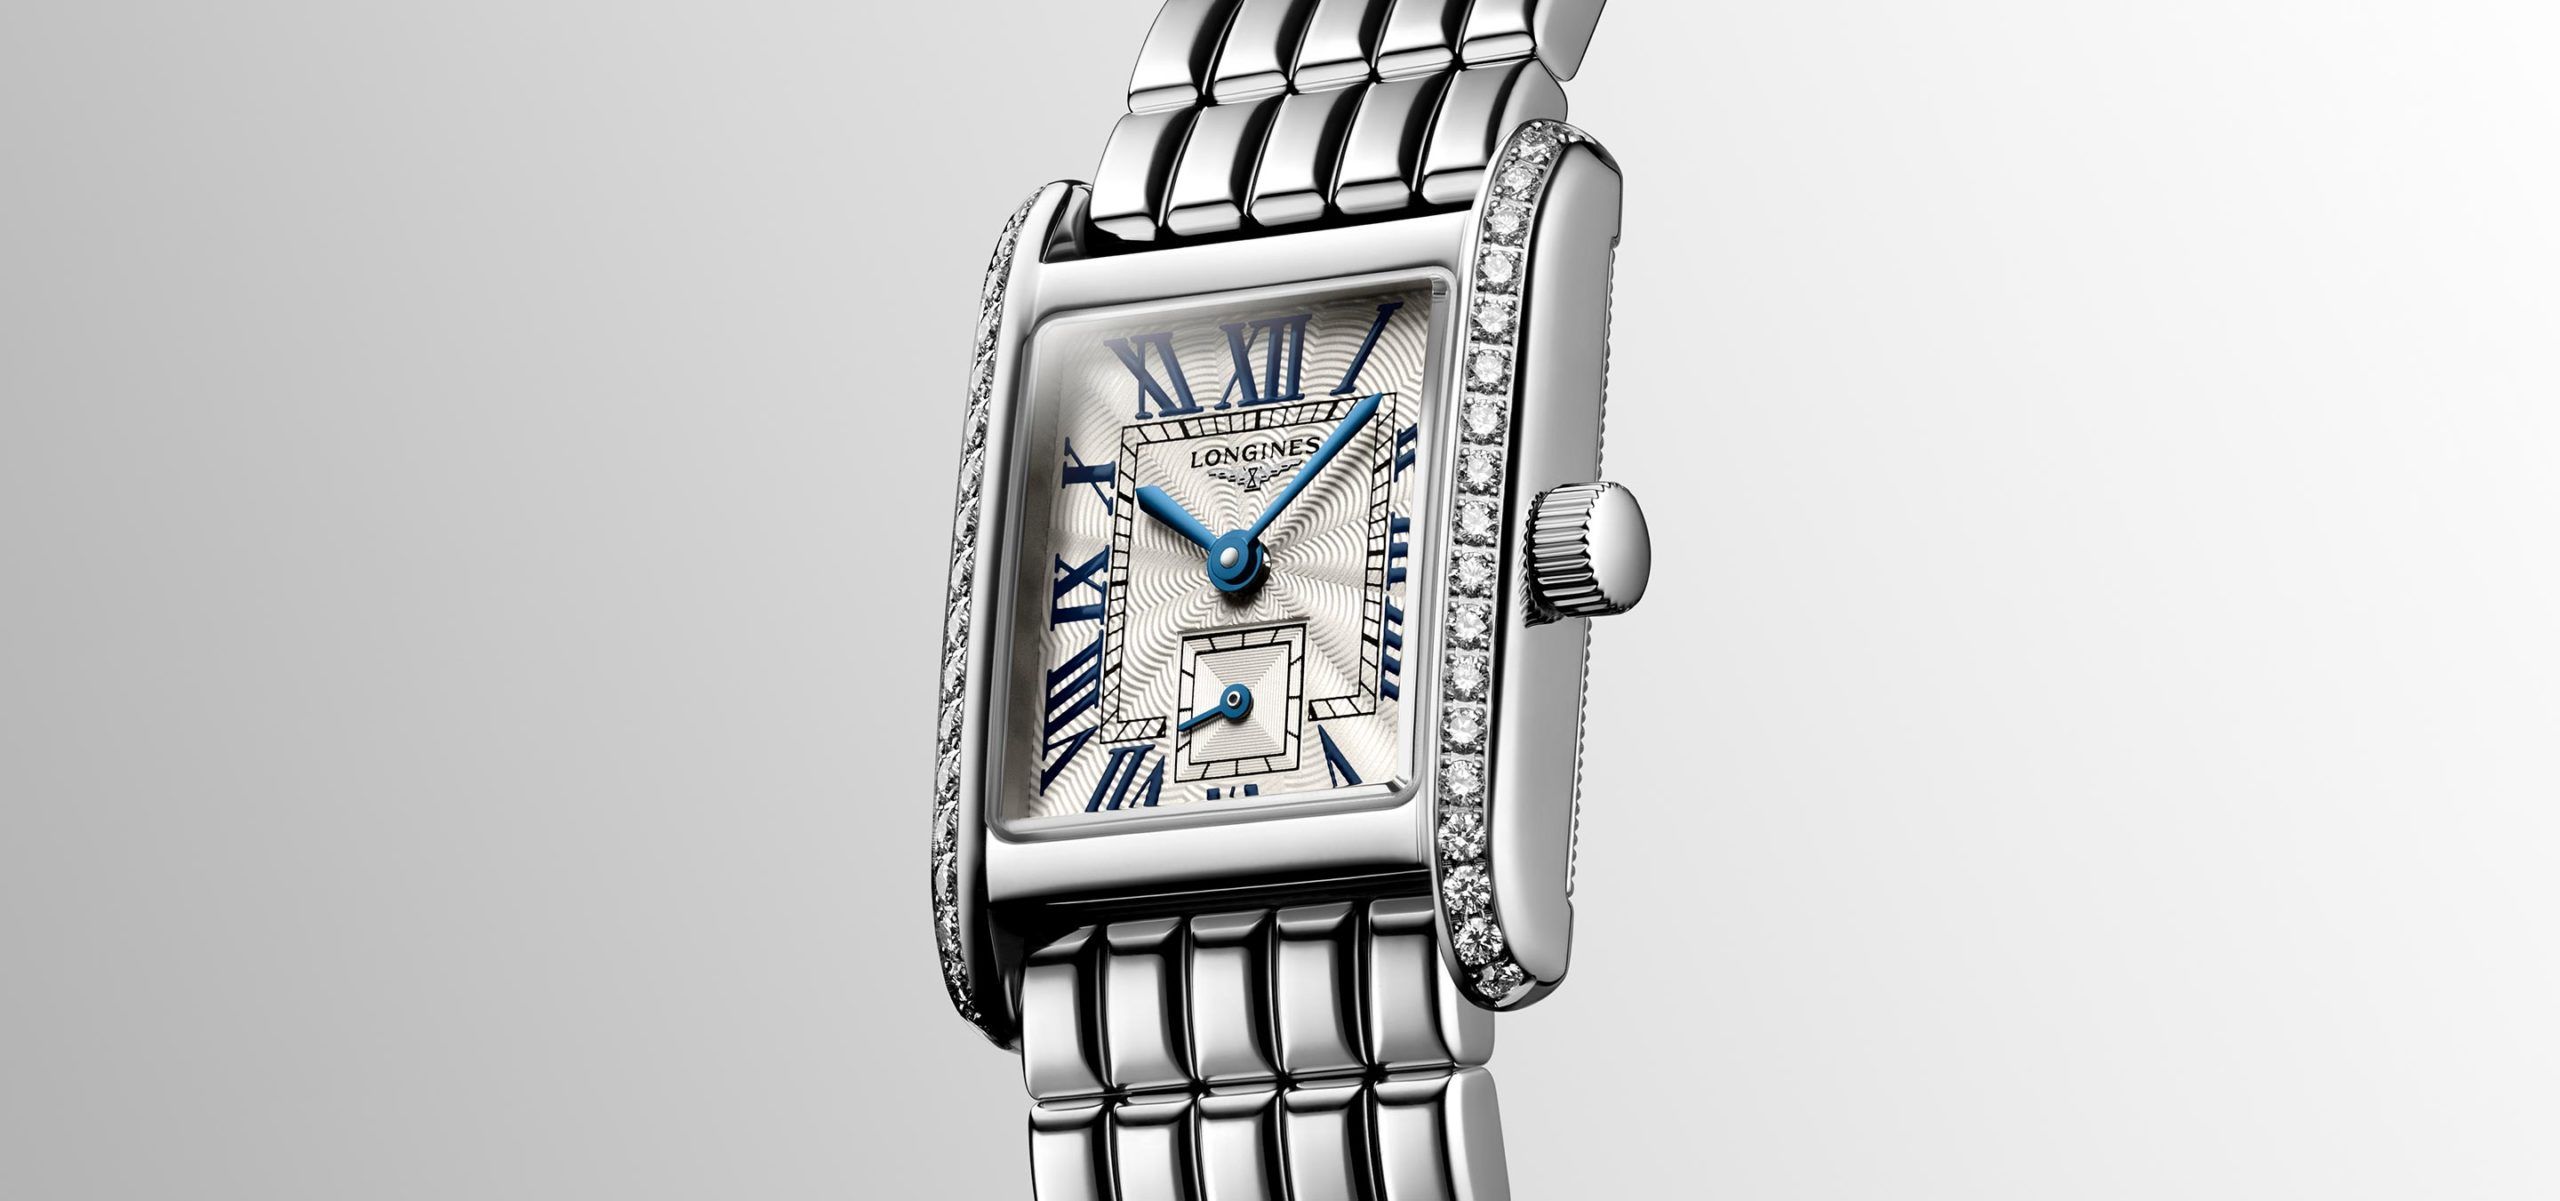 Elegance, Squared: Introducing The New Longines Mini DolceVita Timepieces